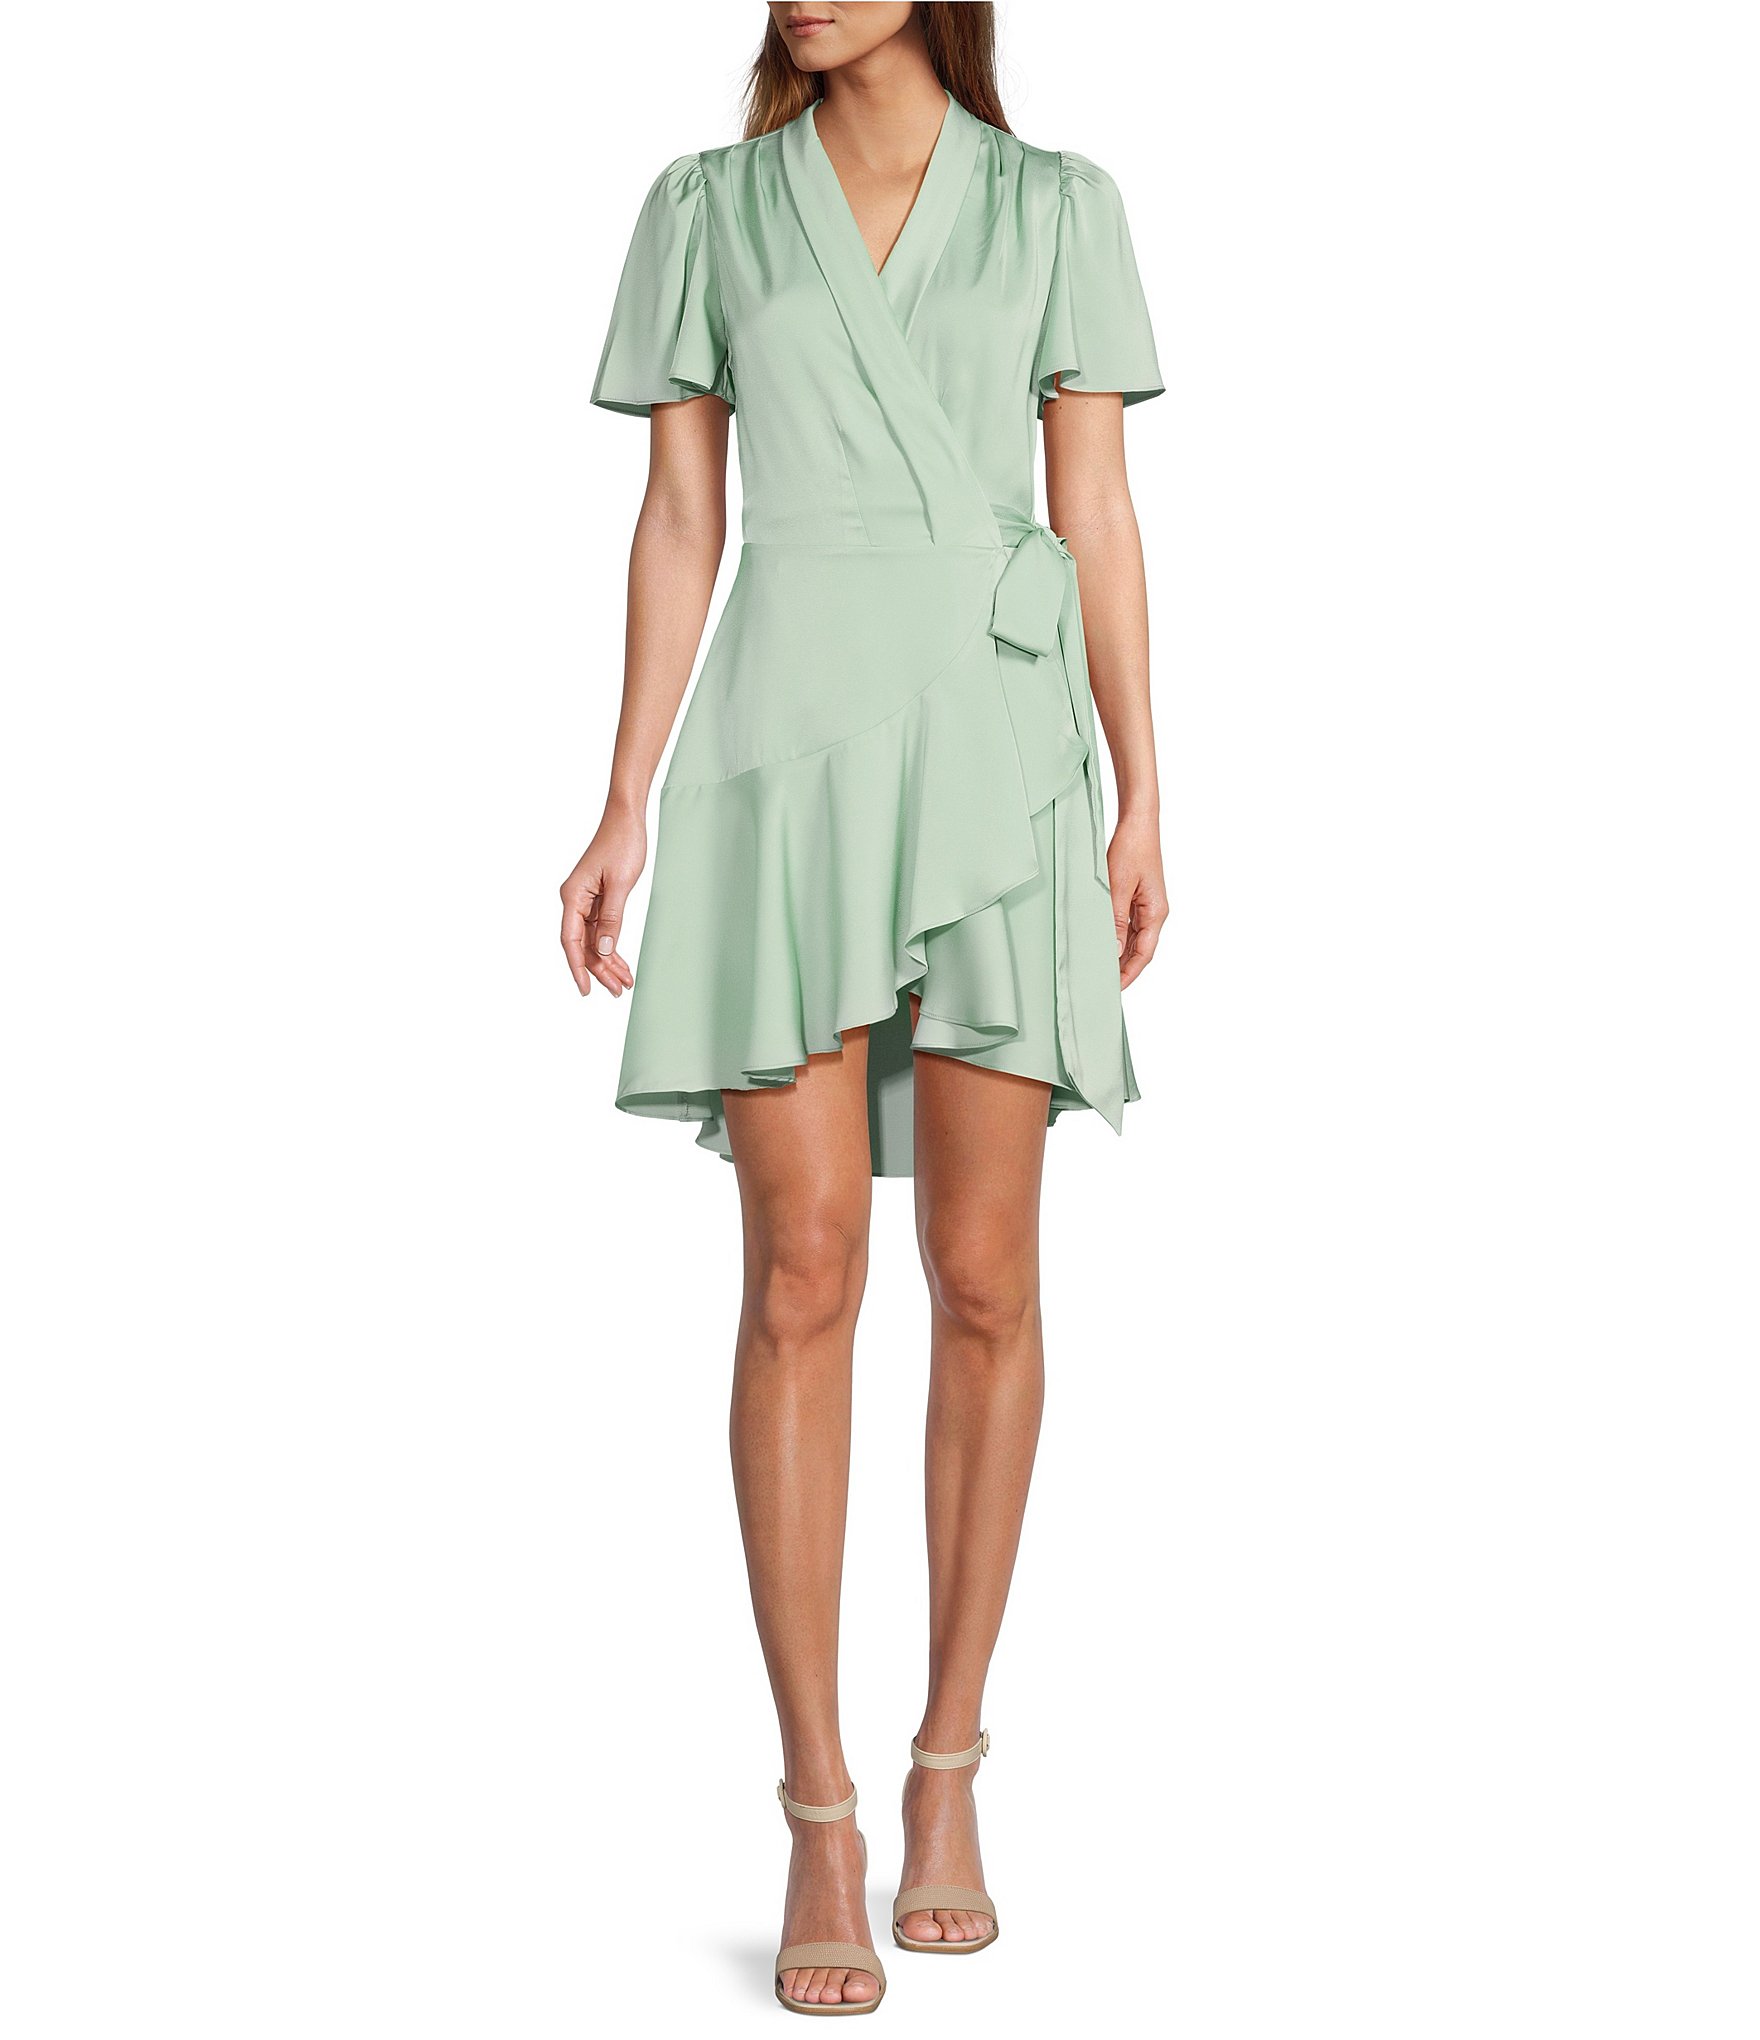 Shawl Collar Women's Contemporary Cocktail & Party Dresses | Dillard's